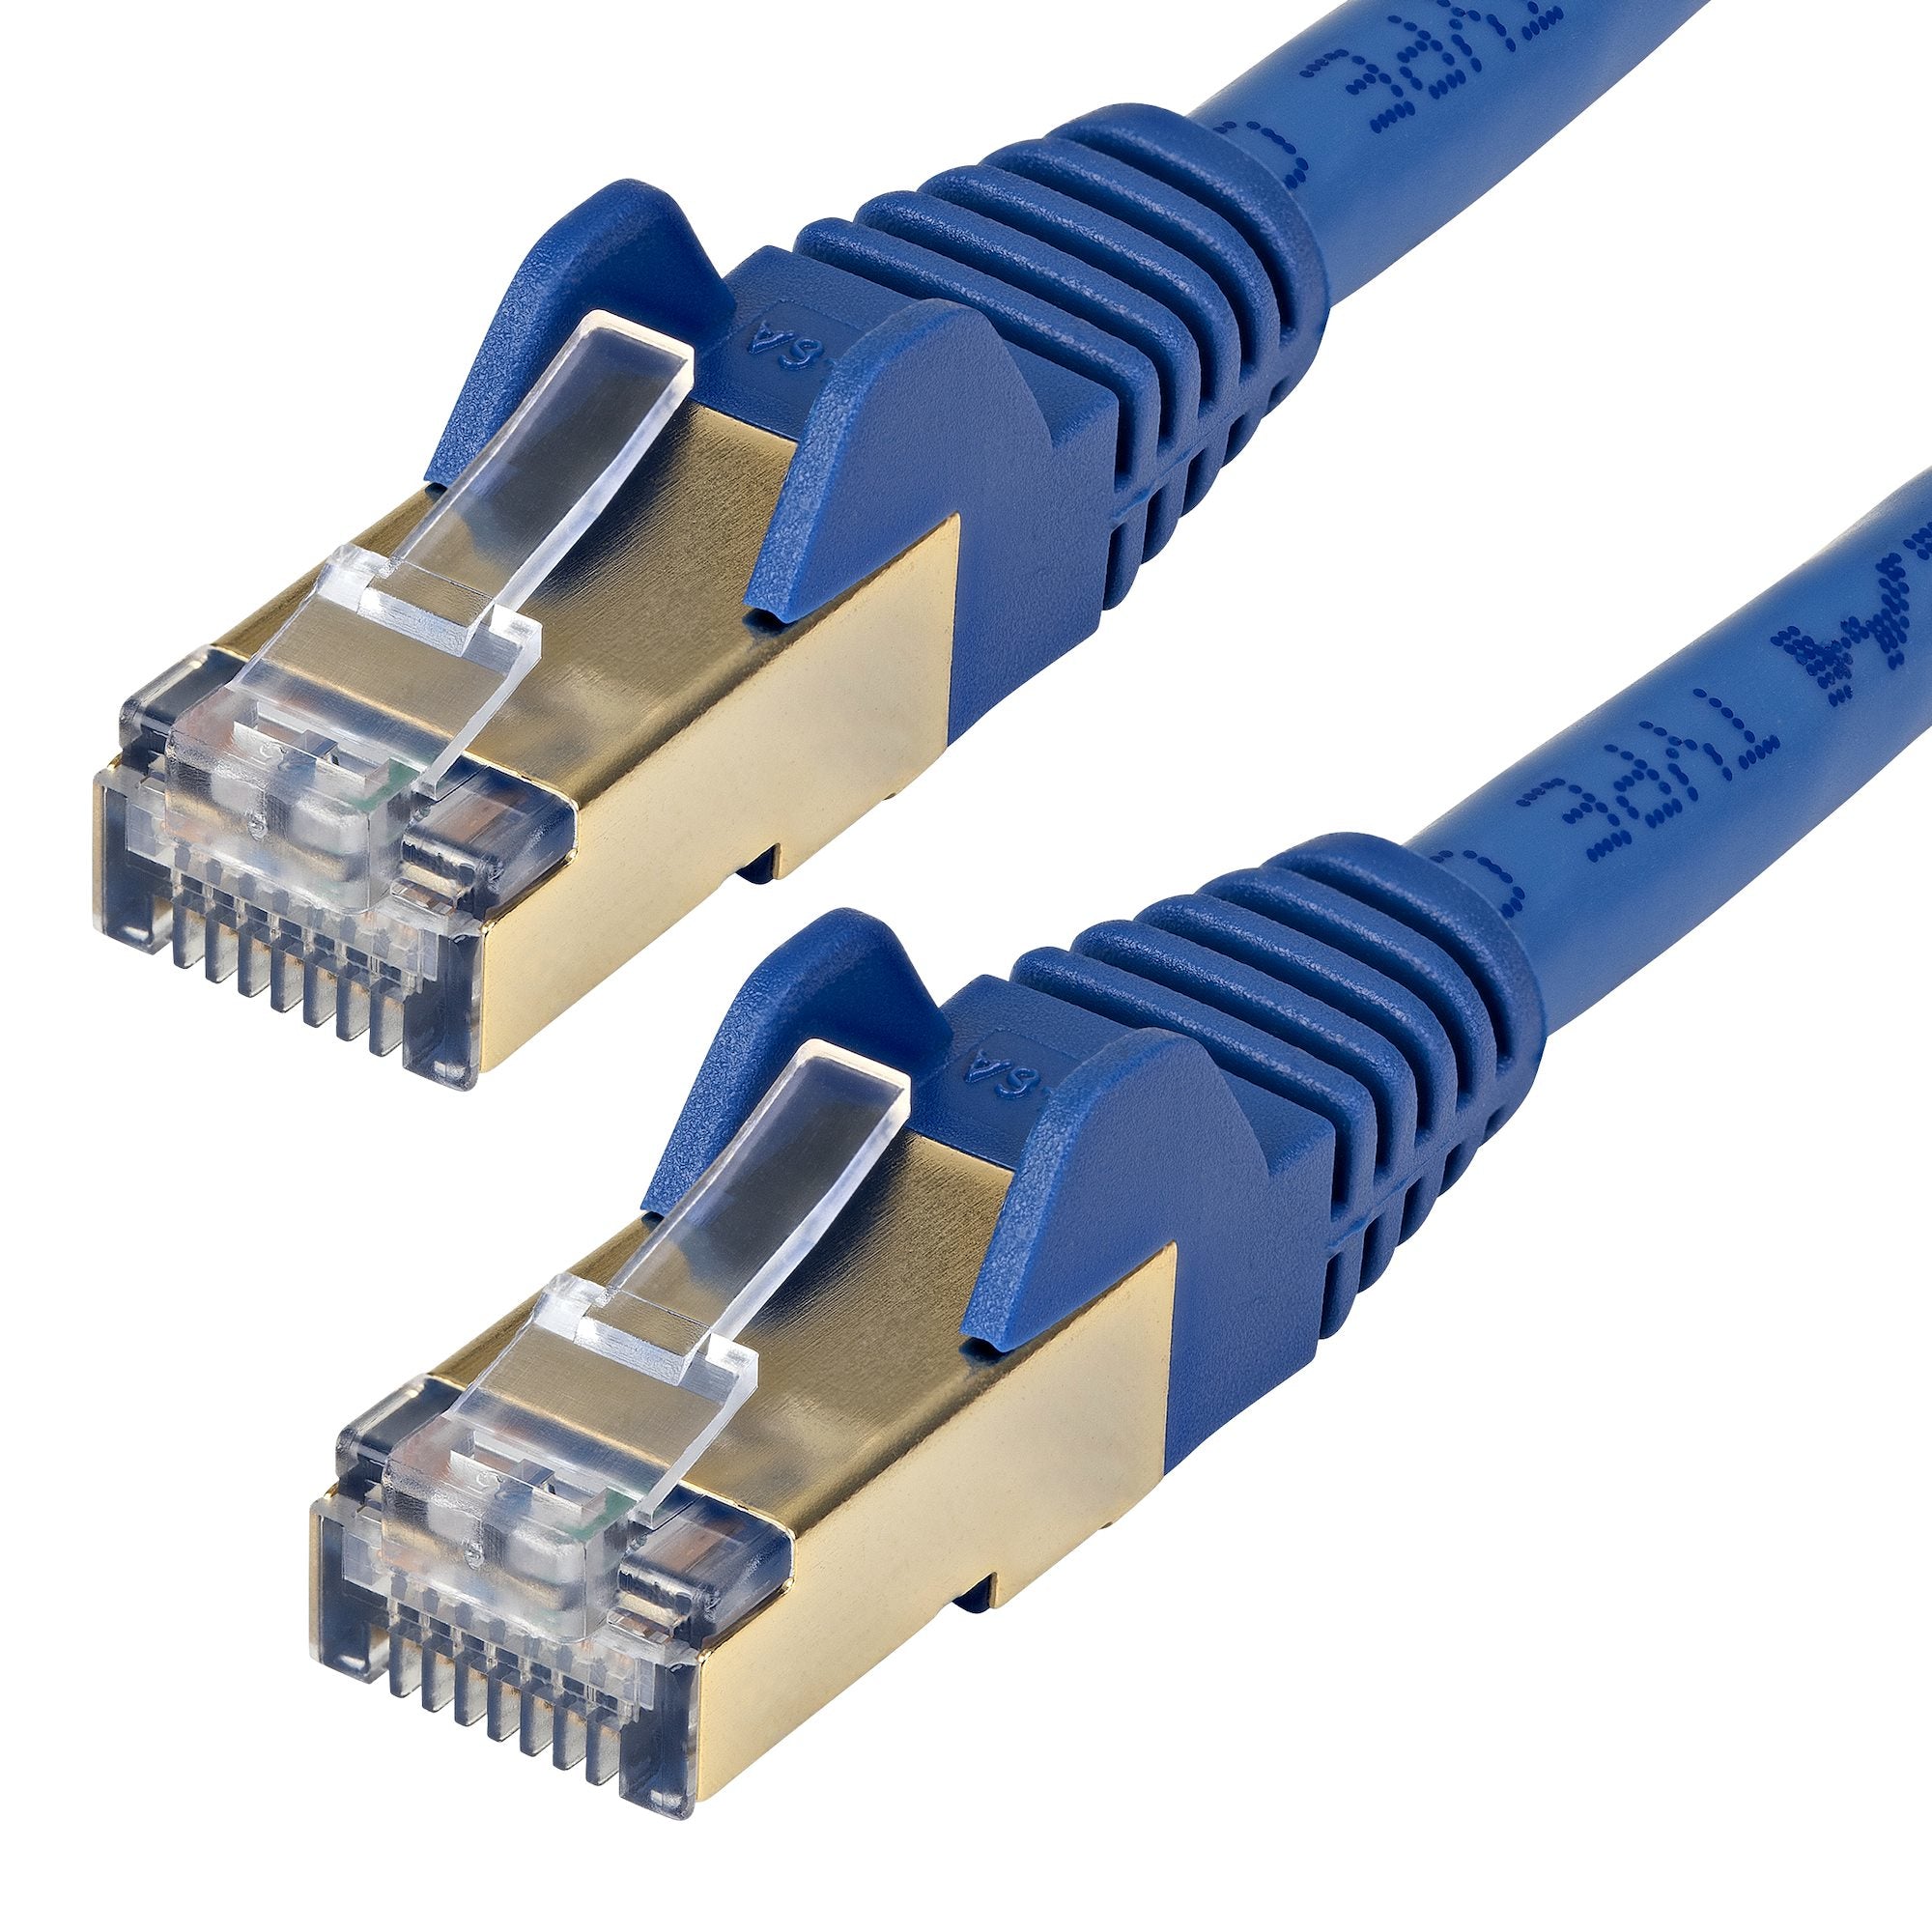 StarTech.com 5m CAT6a Ethernet Cable - 10 Gigabit Shielded Snagless RJ45 100W PoE Patch Cord - 10GbE STP Network Cable w/Strain Relief - Blue Fluke Tested/Wiring is UL Certified/TIA